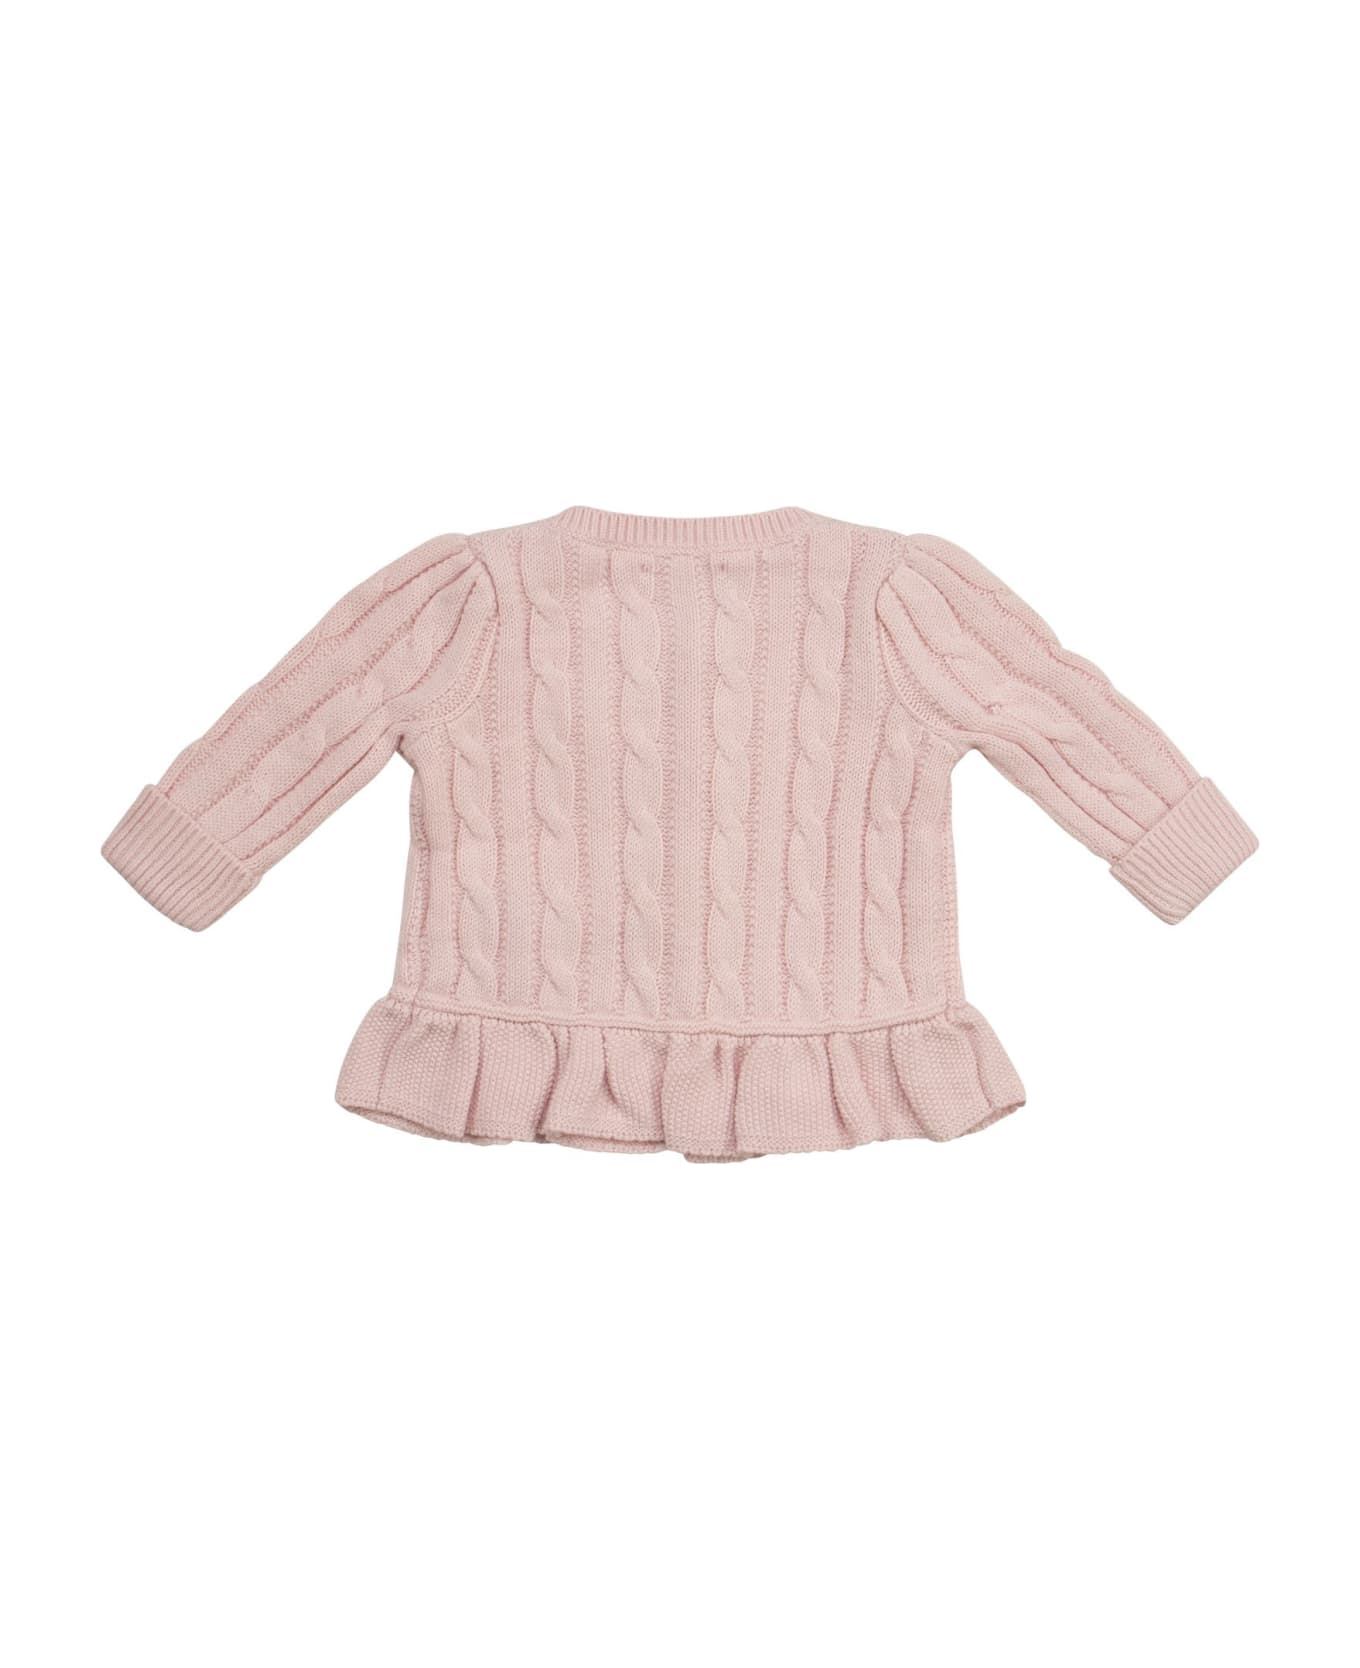 Polo Ralph Lauren Cable-knit Cardigan - Pink